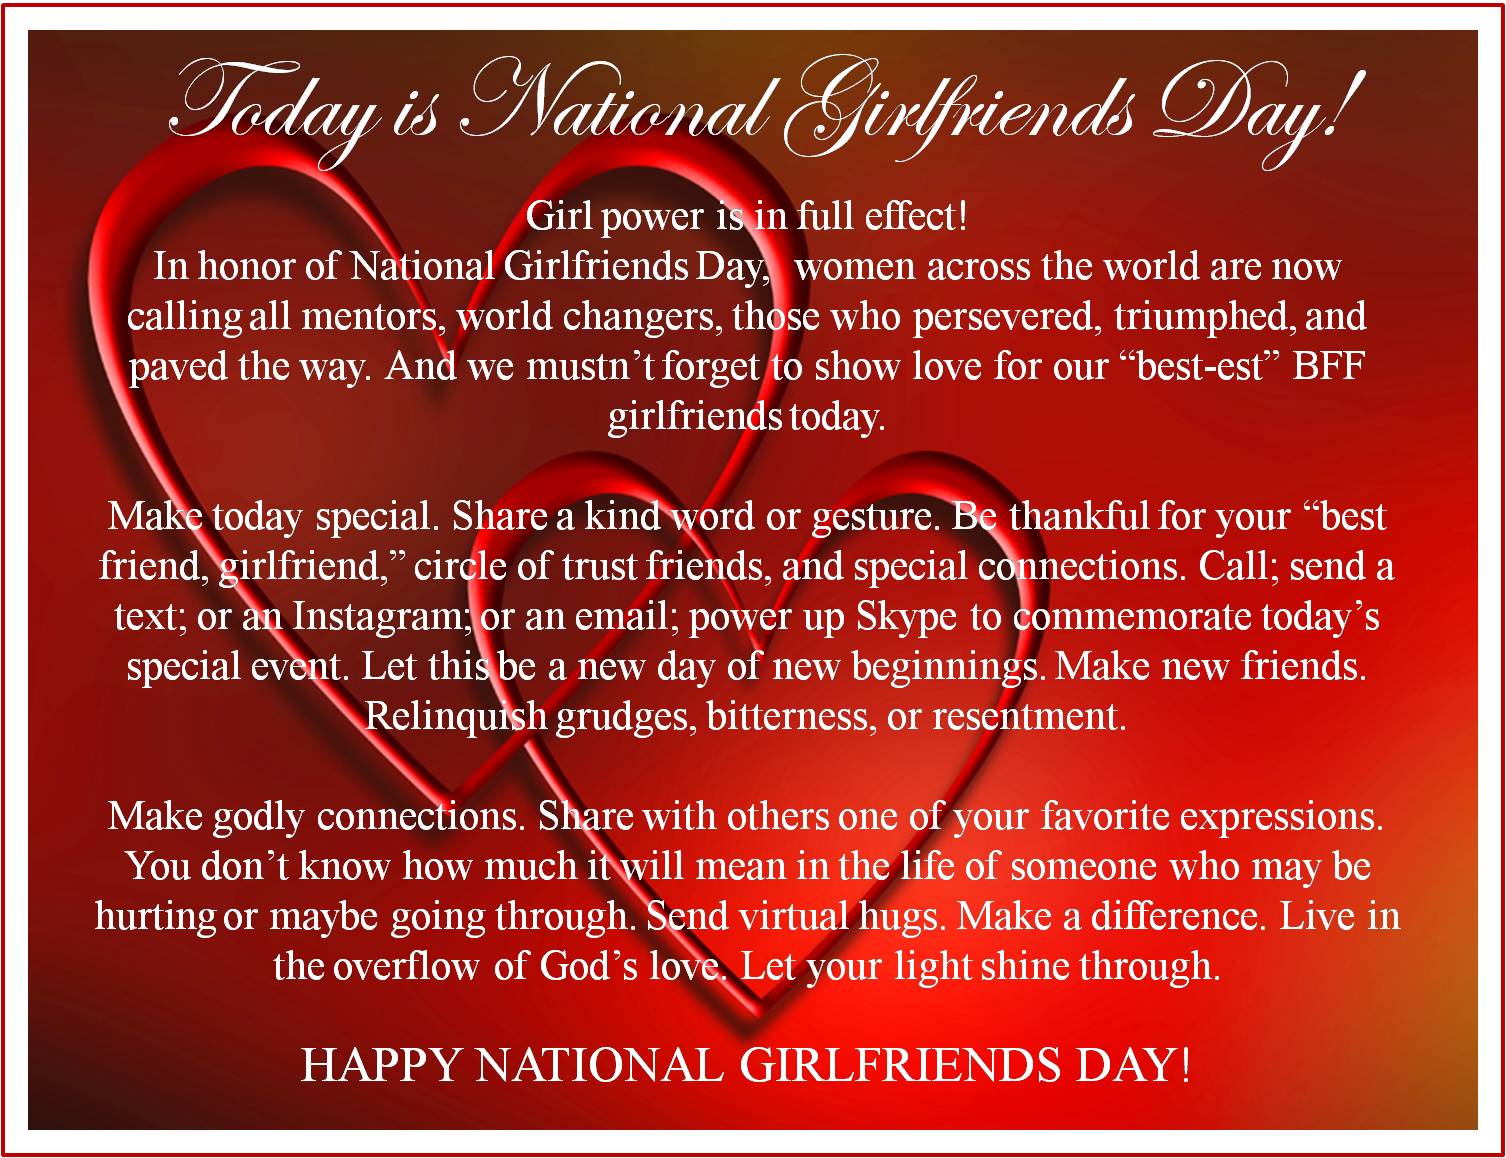 Today is National Girlfriends Day